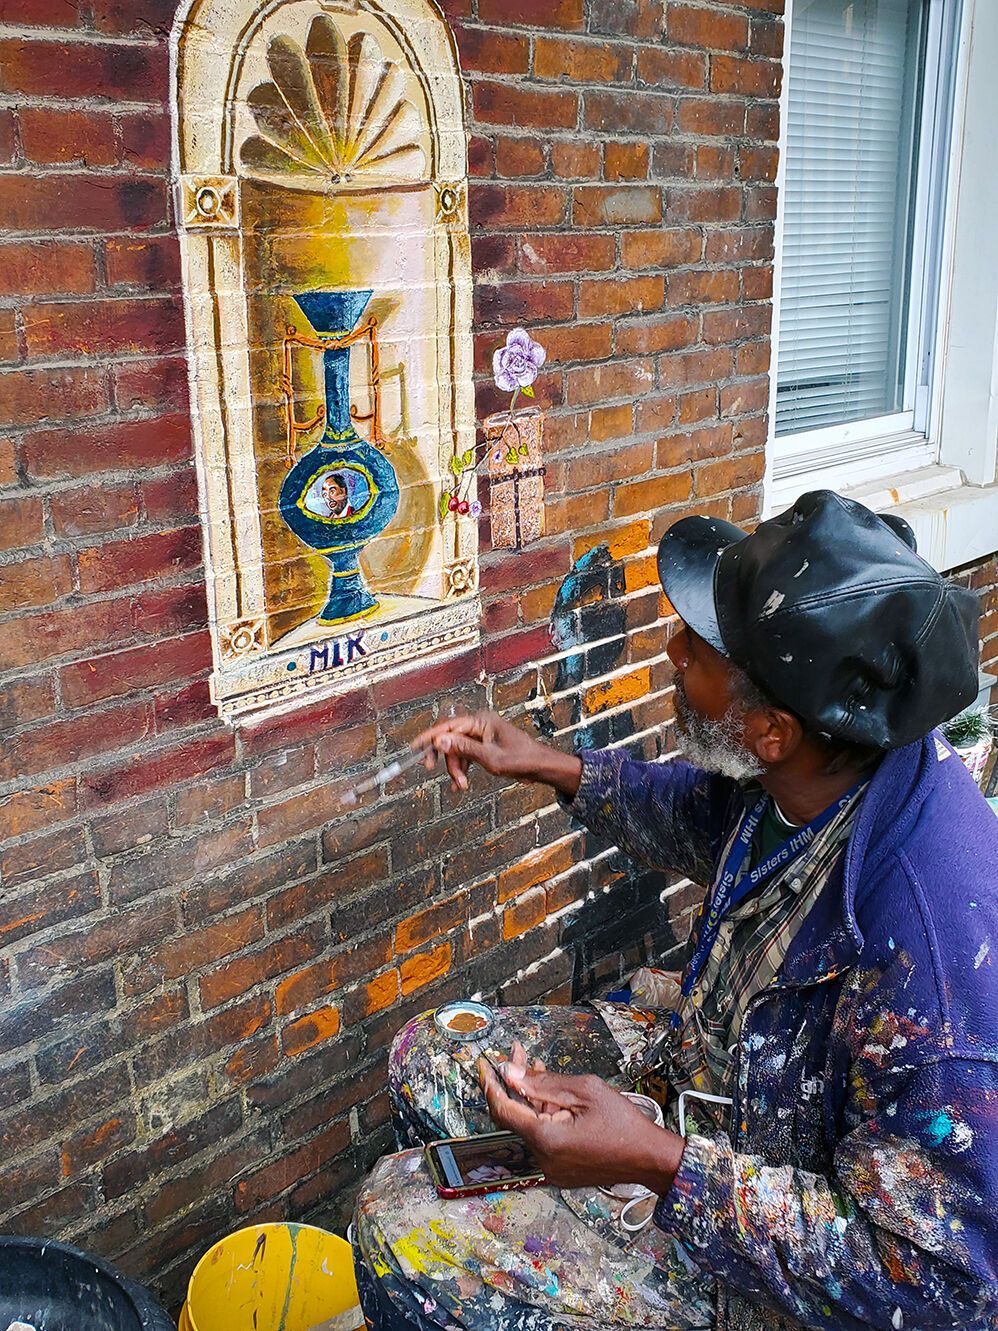 Jamaica Ray paints elaborate, tropical and cultural images on the exterior of a historic two-story building in the Old North neighborhood. Image by Sylvester Brown Jr. United States, 2020.